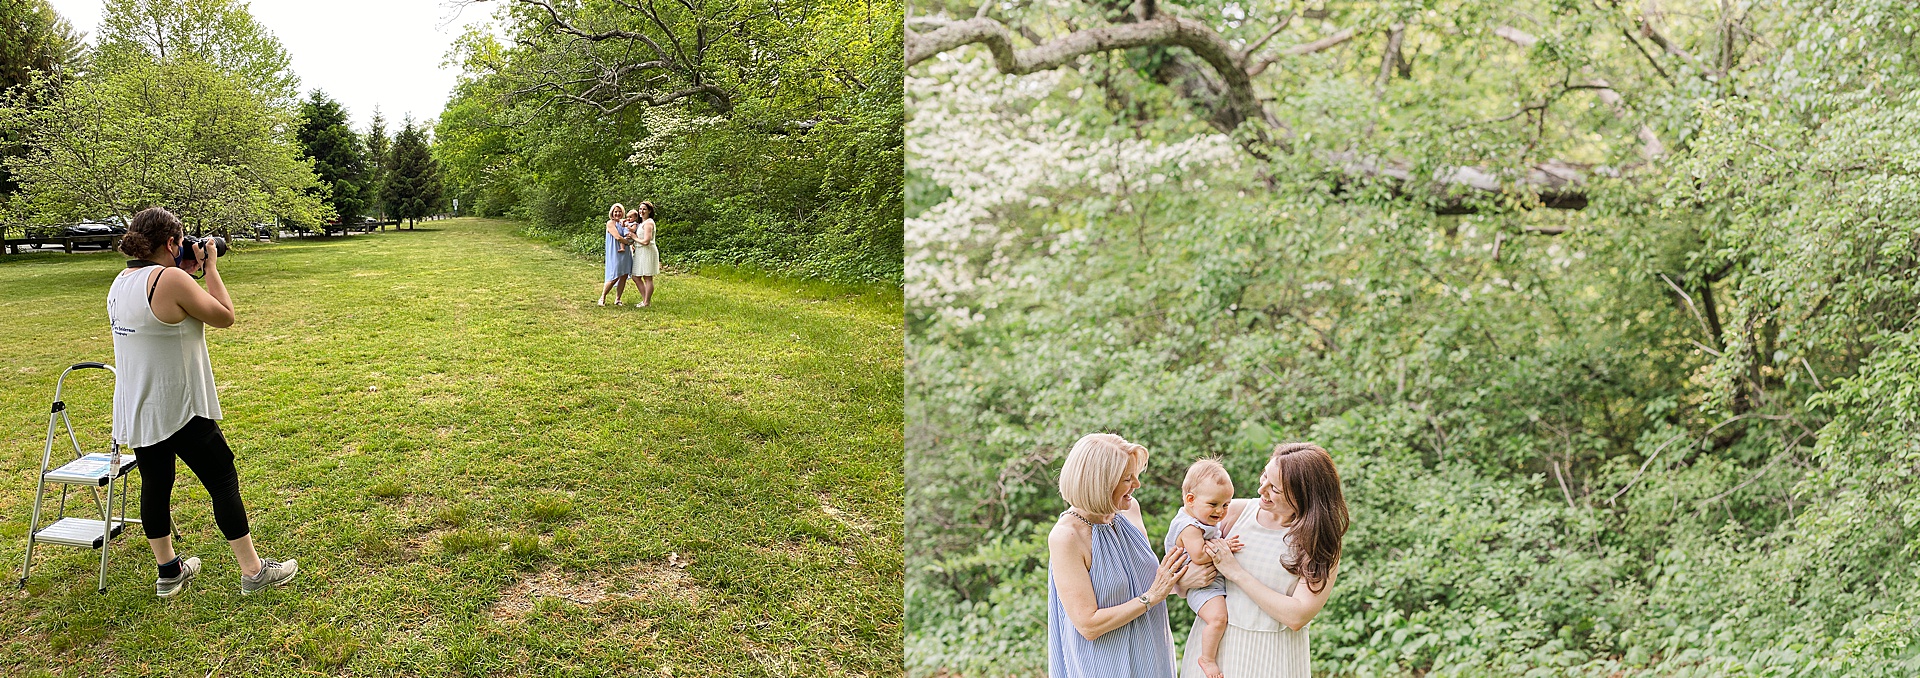 behind the scenes photo of extended family photo session with Sara Sniderman Photography in Natick Massachusetts